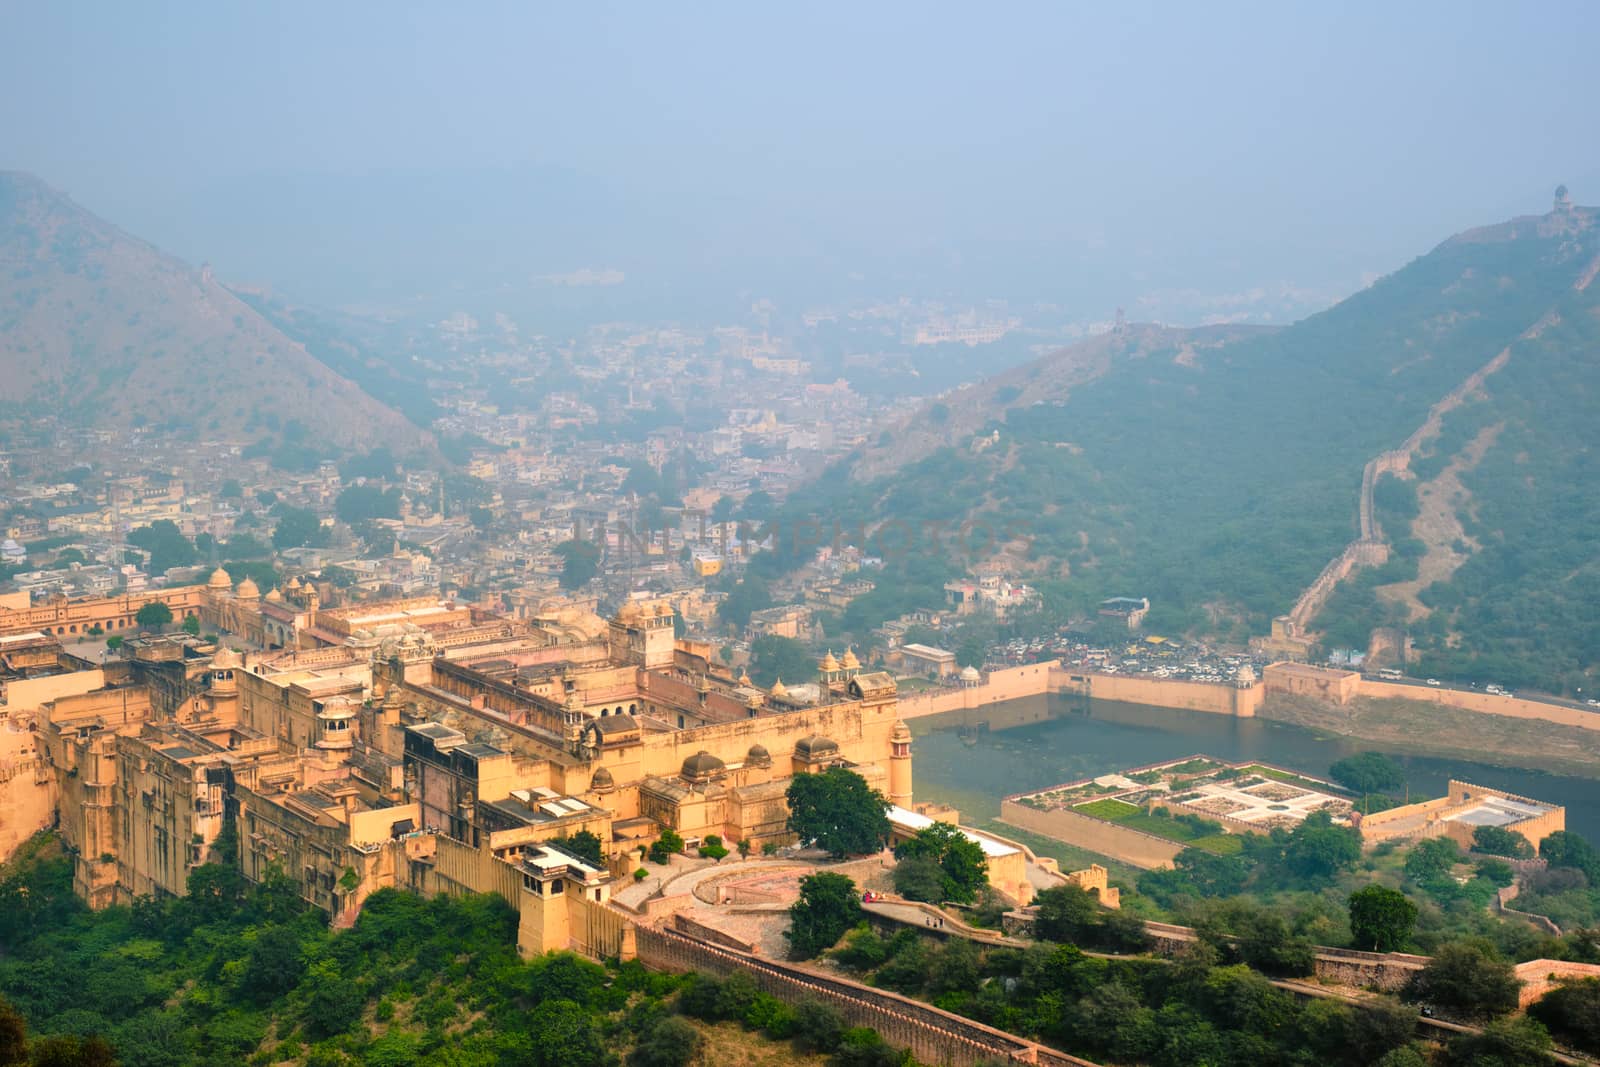 Indian travel famous tourist landmark - view of Amer (Amber) fort and Maota lake from Jaigarh Fort. Jaipur, Rajasthan, India